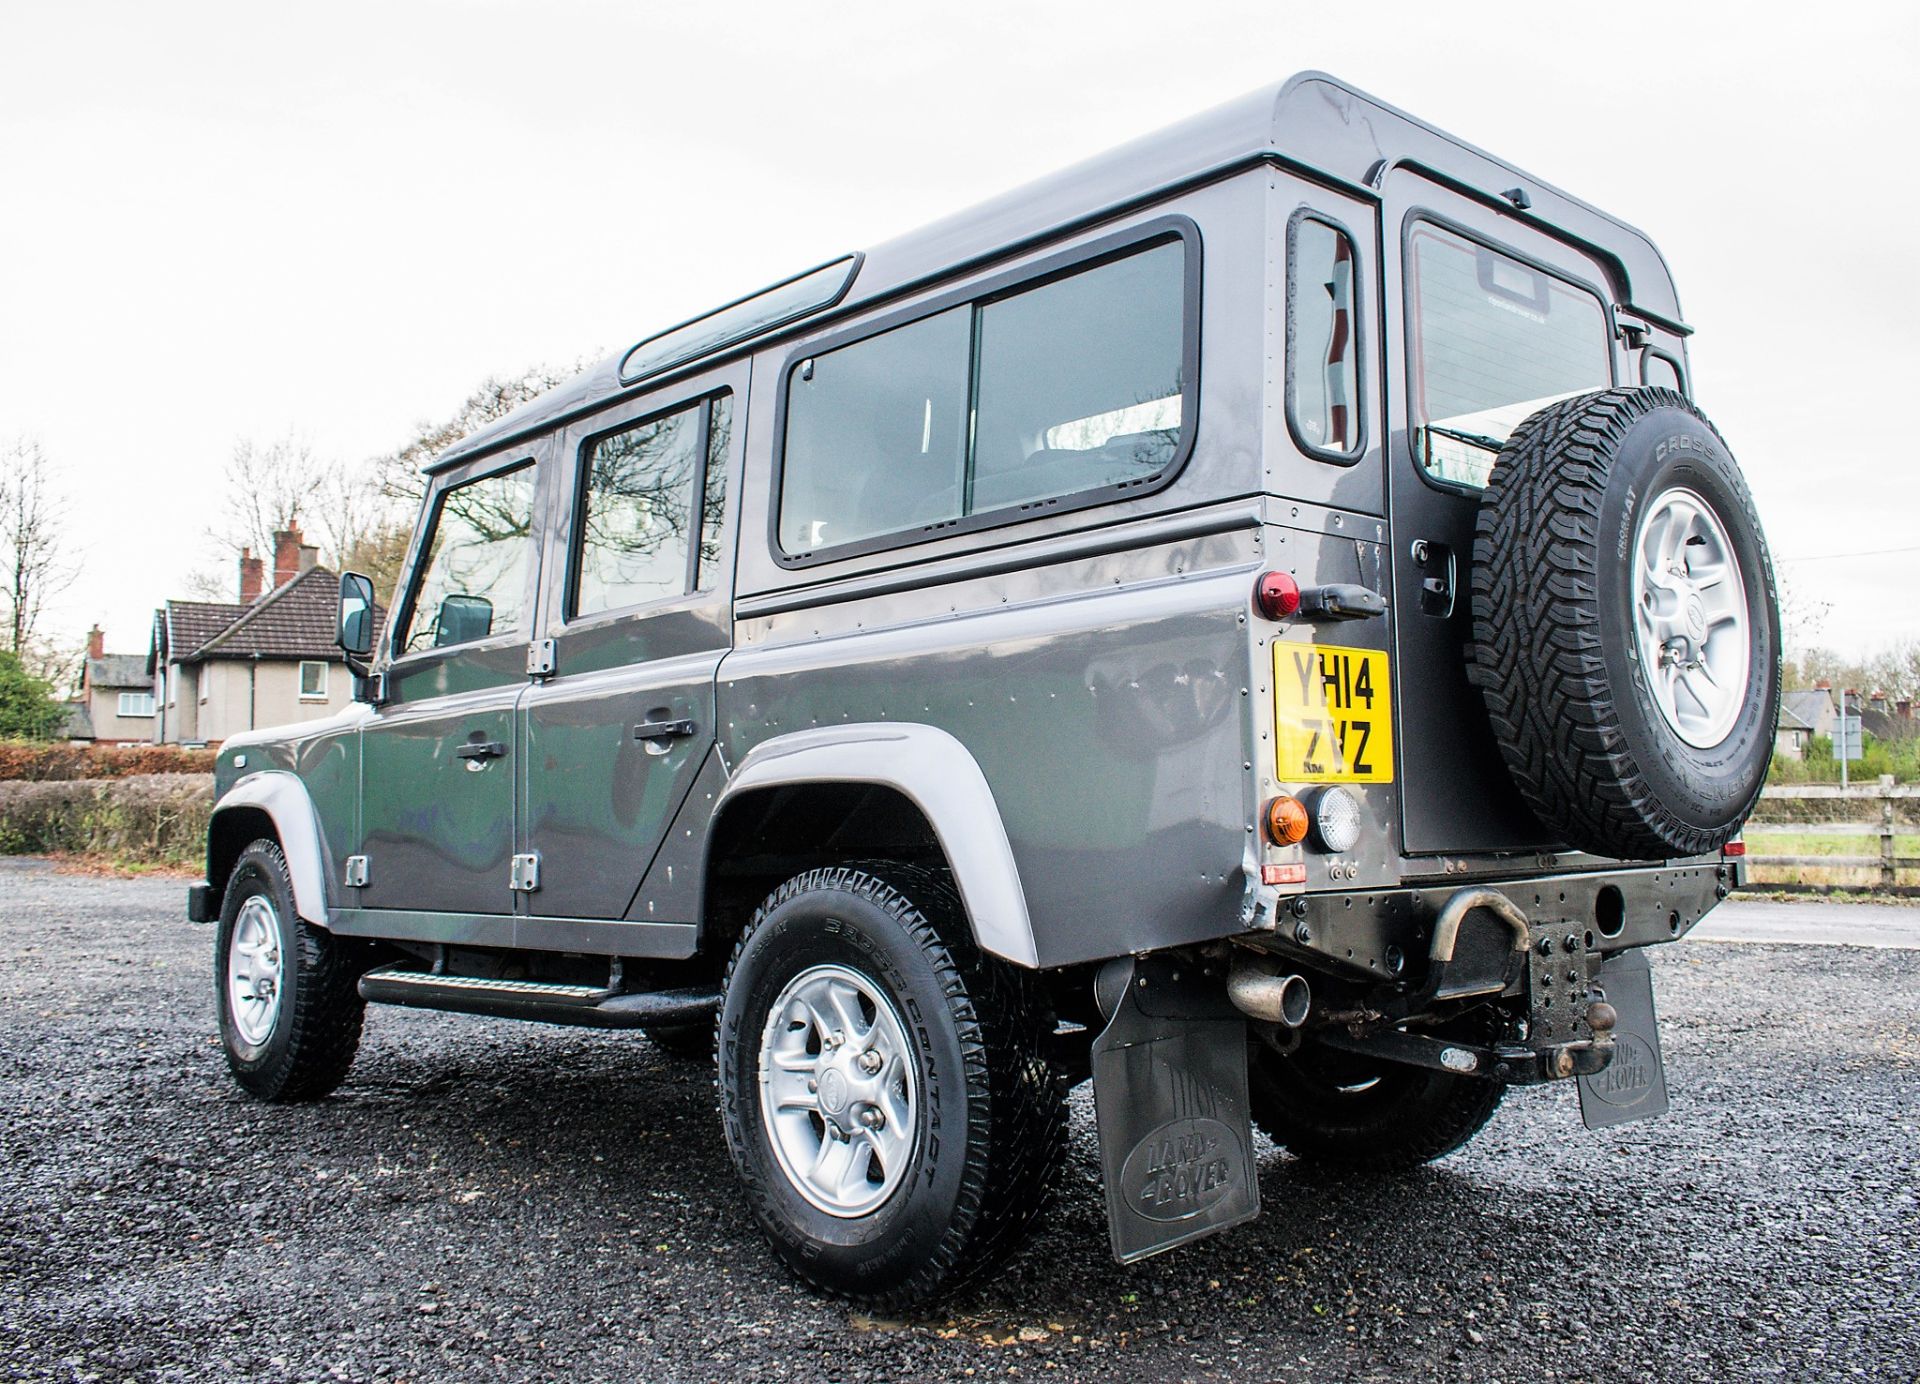 Land Rover Defender 110 XS TD 4 wheel drive utility vehicle Registration Number: YH14 ZVZ Date of - Image 4 of 34